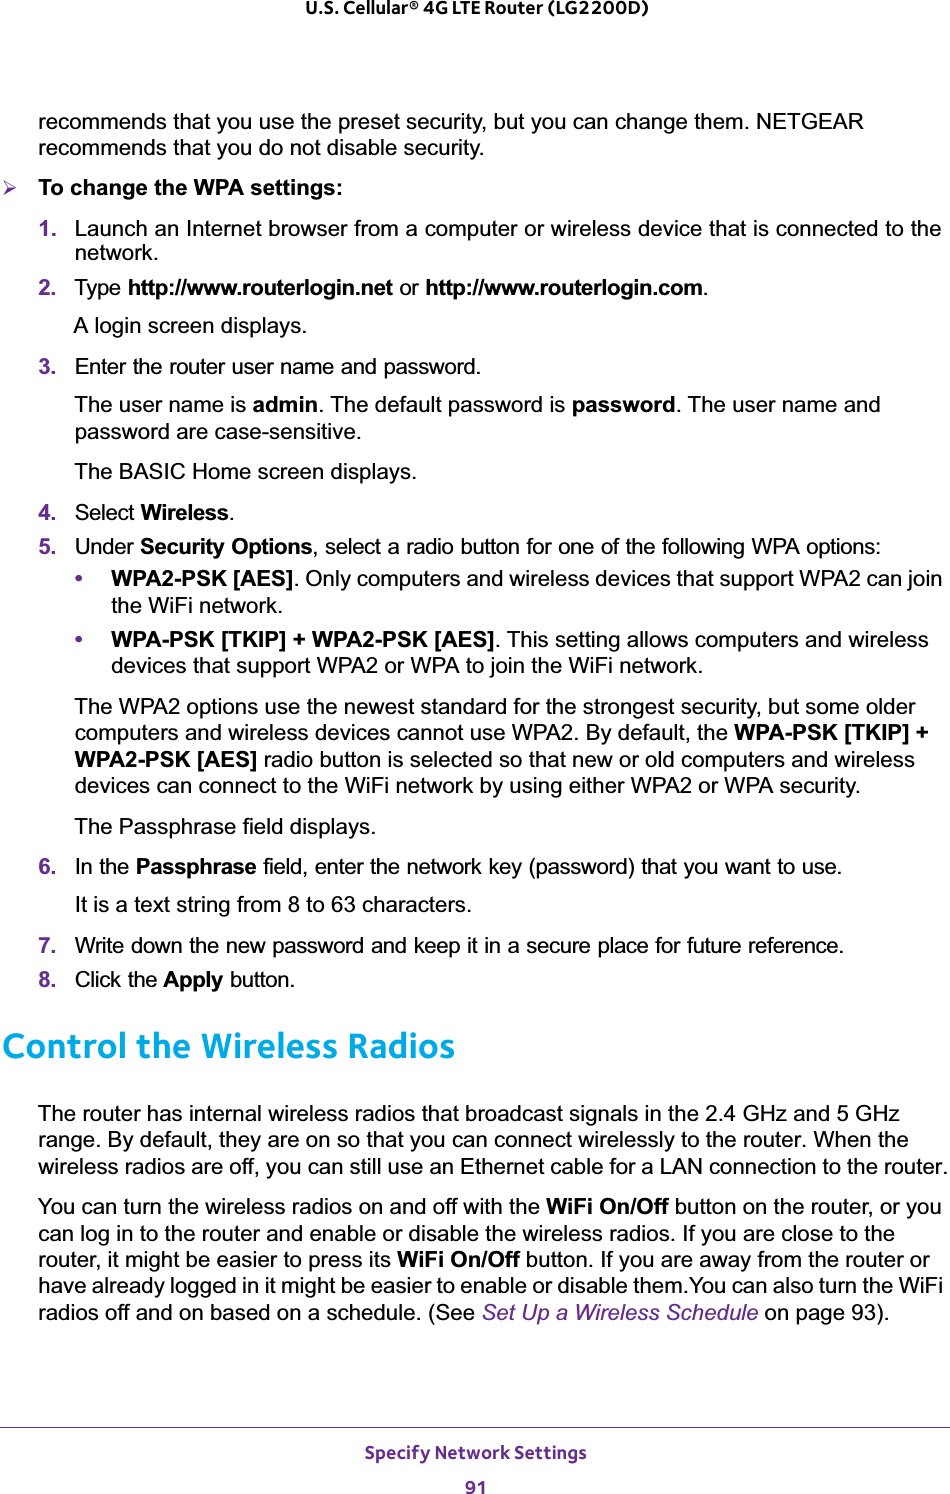 Specify Network Settings91 U.S. Cellular® 4G LTE Router (LG2200D)recommends that you use the preset security, but you can change them. NETGEAR recommends that you do not disable security.¾To change the WPA settings:1. Launch an Internet browser from a computer or wireless device that is connected to the network.2. Type http://www.routerlogin.net or http://www.routerlogin.com.A login screen displays.3. Enter the router user name and password.The user name is admin. The default password is password. The user name and password are case-sensitive.The BASIC Home screen displays.4. Select Wireless.5. Under Security Options, select a radio button for one of the following WPA options:•WPA2-PSK [AES]. Only computers and wireless devices that support WPA2 can join the WiFi network.•WPA-PSK [TKIP] + WPA2-PSK [AES]. This setting allows computers and wireless devices that support WPA2 or WPA to join the WiFi network.The WPA2 options use the newest standard for the strongest security, but some older computers and wireless devices cannot use WPA2. By default, the WPA-PSK [TKIP] + WPA2-PSK [AES] radio button is selected so that new or old computers and wireless devices can connect to the WiFi network by using either WPA2 or WPA security. The Passphrase field displays.6. In the Passphrase field, enter the network key (password) that you want to use. It is a text string from 8 to 63 characters.7. Write down the new password and keep it in a secure place for future reference.8. Click the Apply button.Control the Wireless RadiosThe router has internal wireless radios that broadcast signals in the 2.4 GHz and 5 GHz range. By default, they are on so that you can connect wirelessly to the router. When the wireless radios are off, you can still use an Ethernet cable for a LAN connection to the router.You can turn the wireless radios on and off with the WiFi On/Off button on the router, or you can log in to the router and enable or disable the wireless radios. If you are close to the router, it might be easier to press its WiFi On/Off button. If you are away from the router or have already logged in it might be easier to enable or disable them.You can also turn the WiFi radios off and on based on a schedule. (See Set Up a Wireless Schedule on page 93).